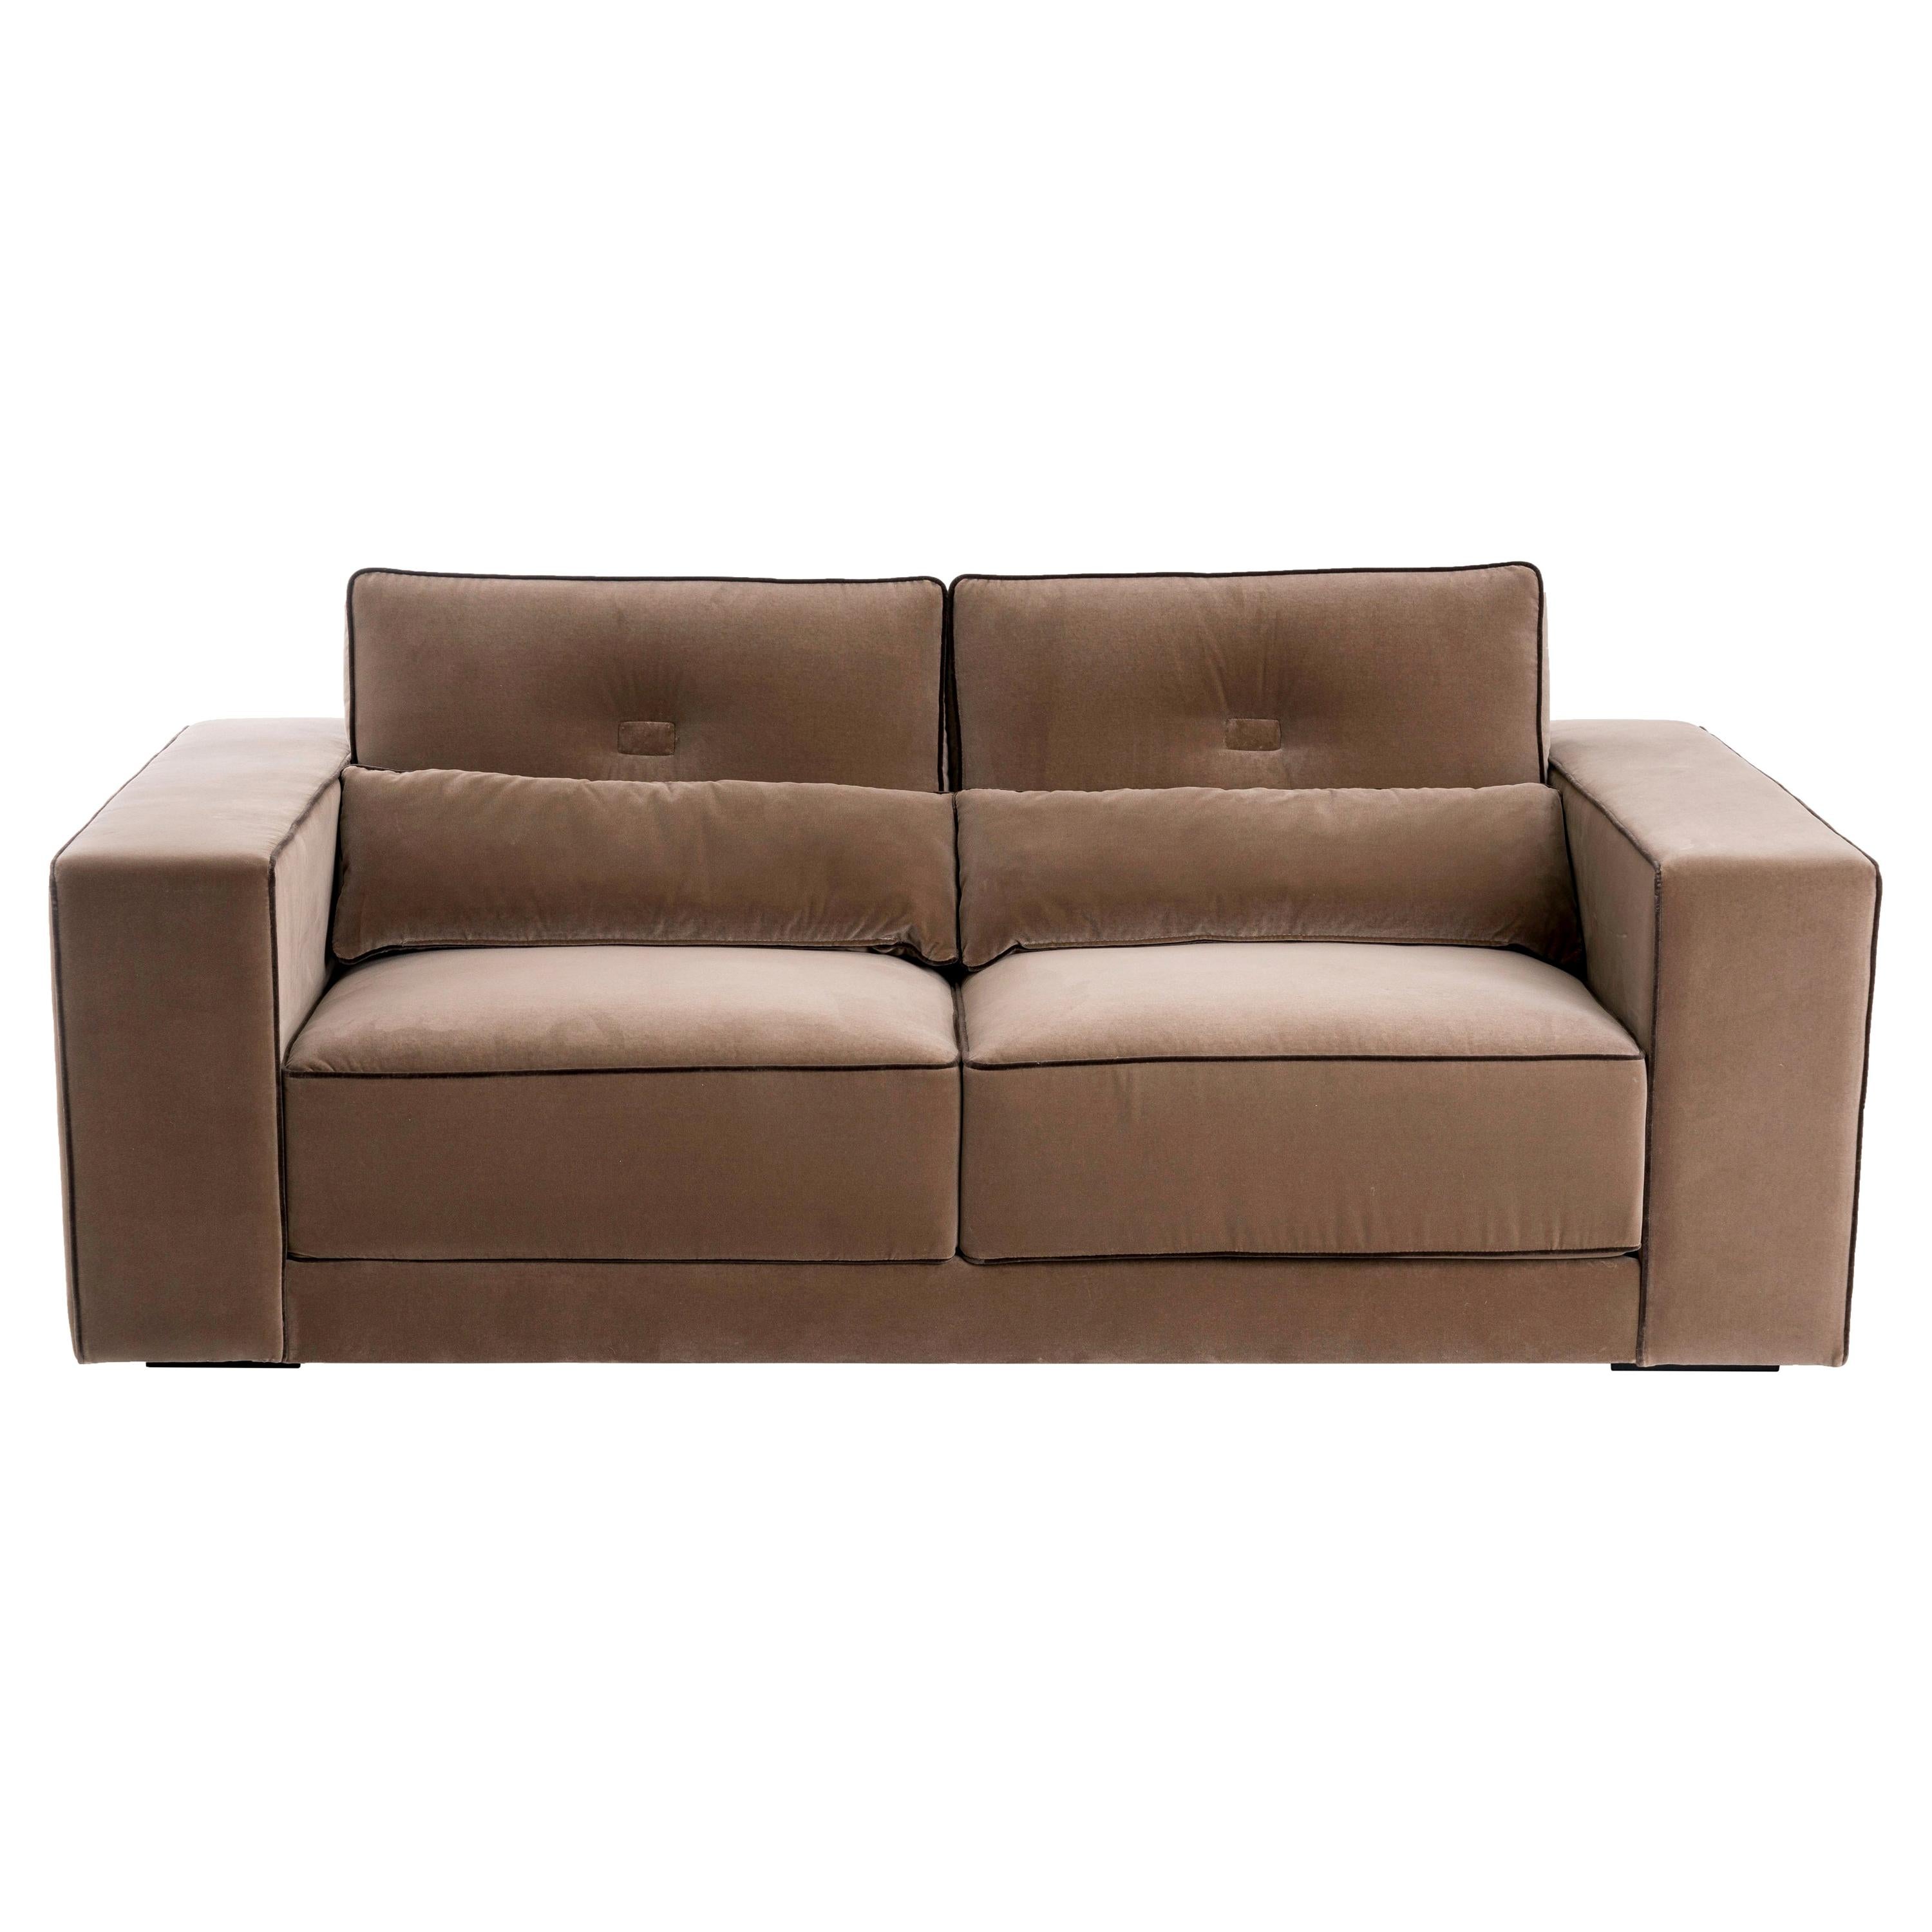 Brown Capricho Midcentury Design Sofa with Contrasting Piping Details For Sale